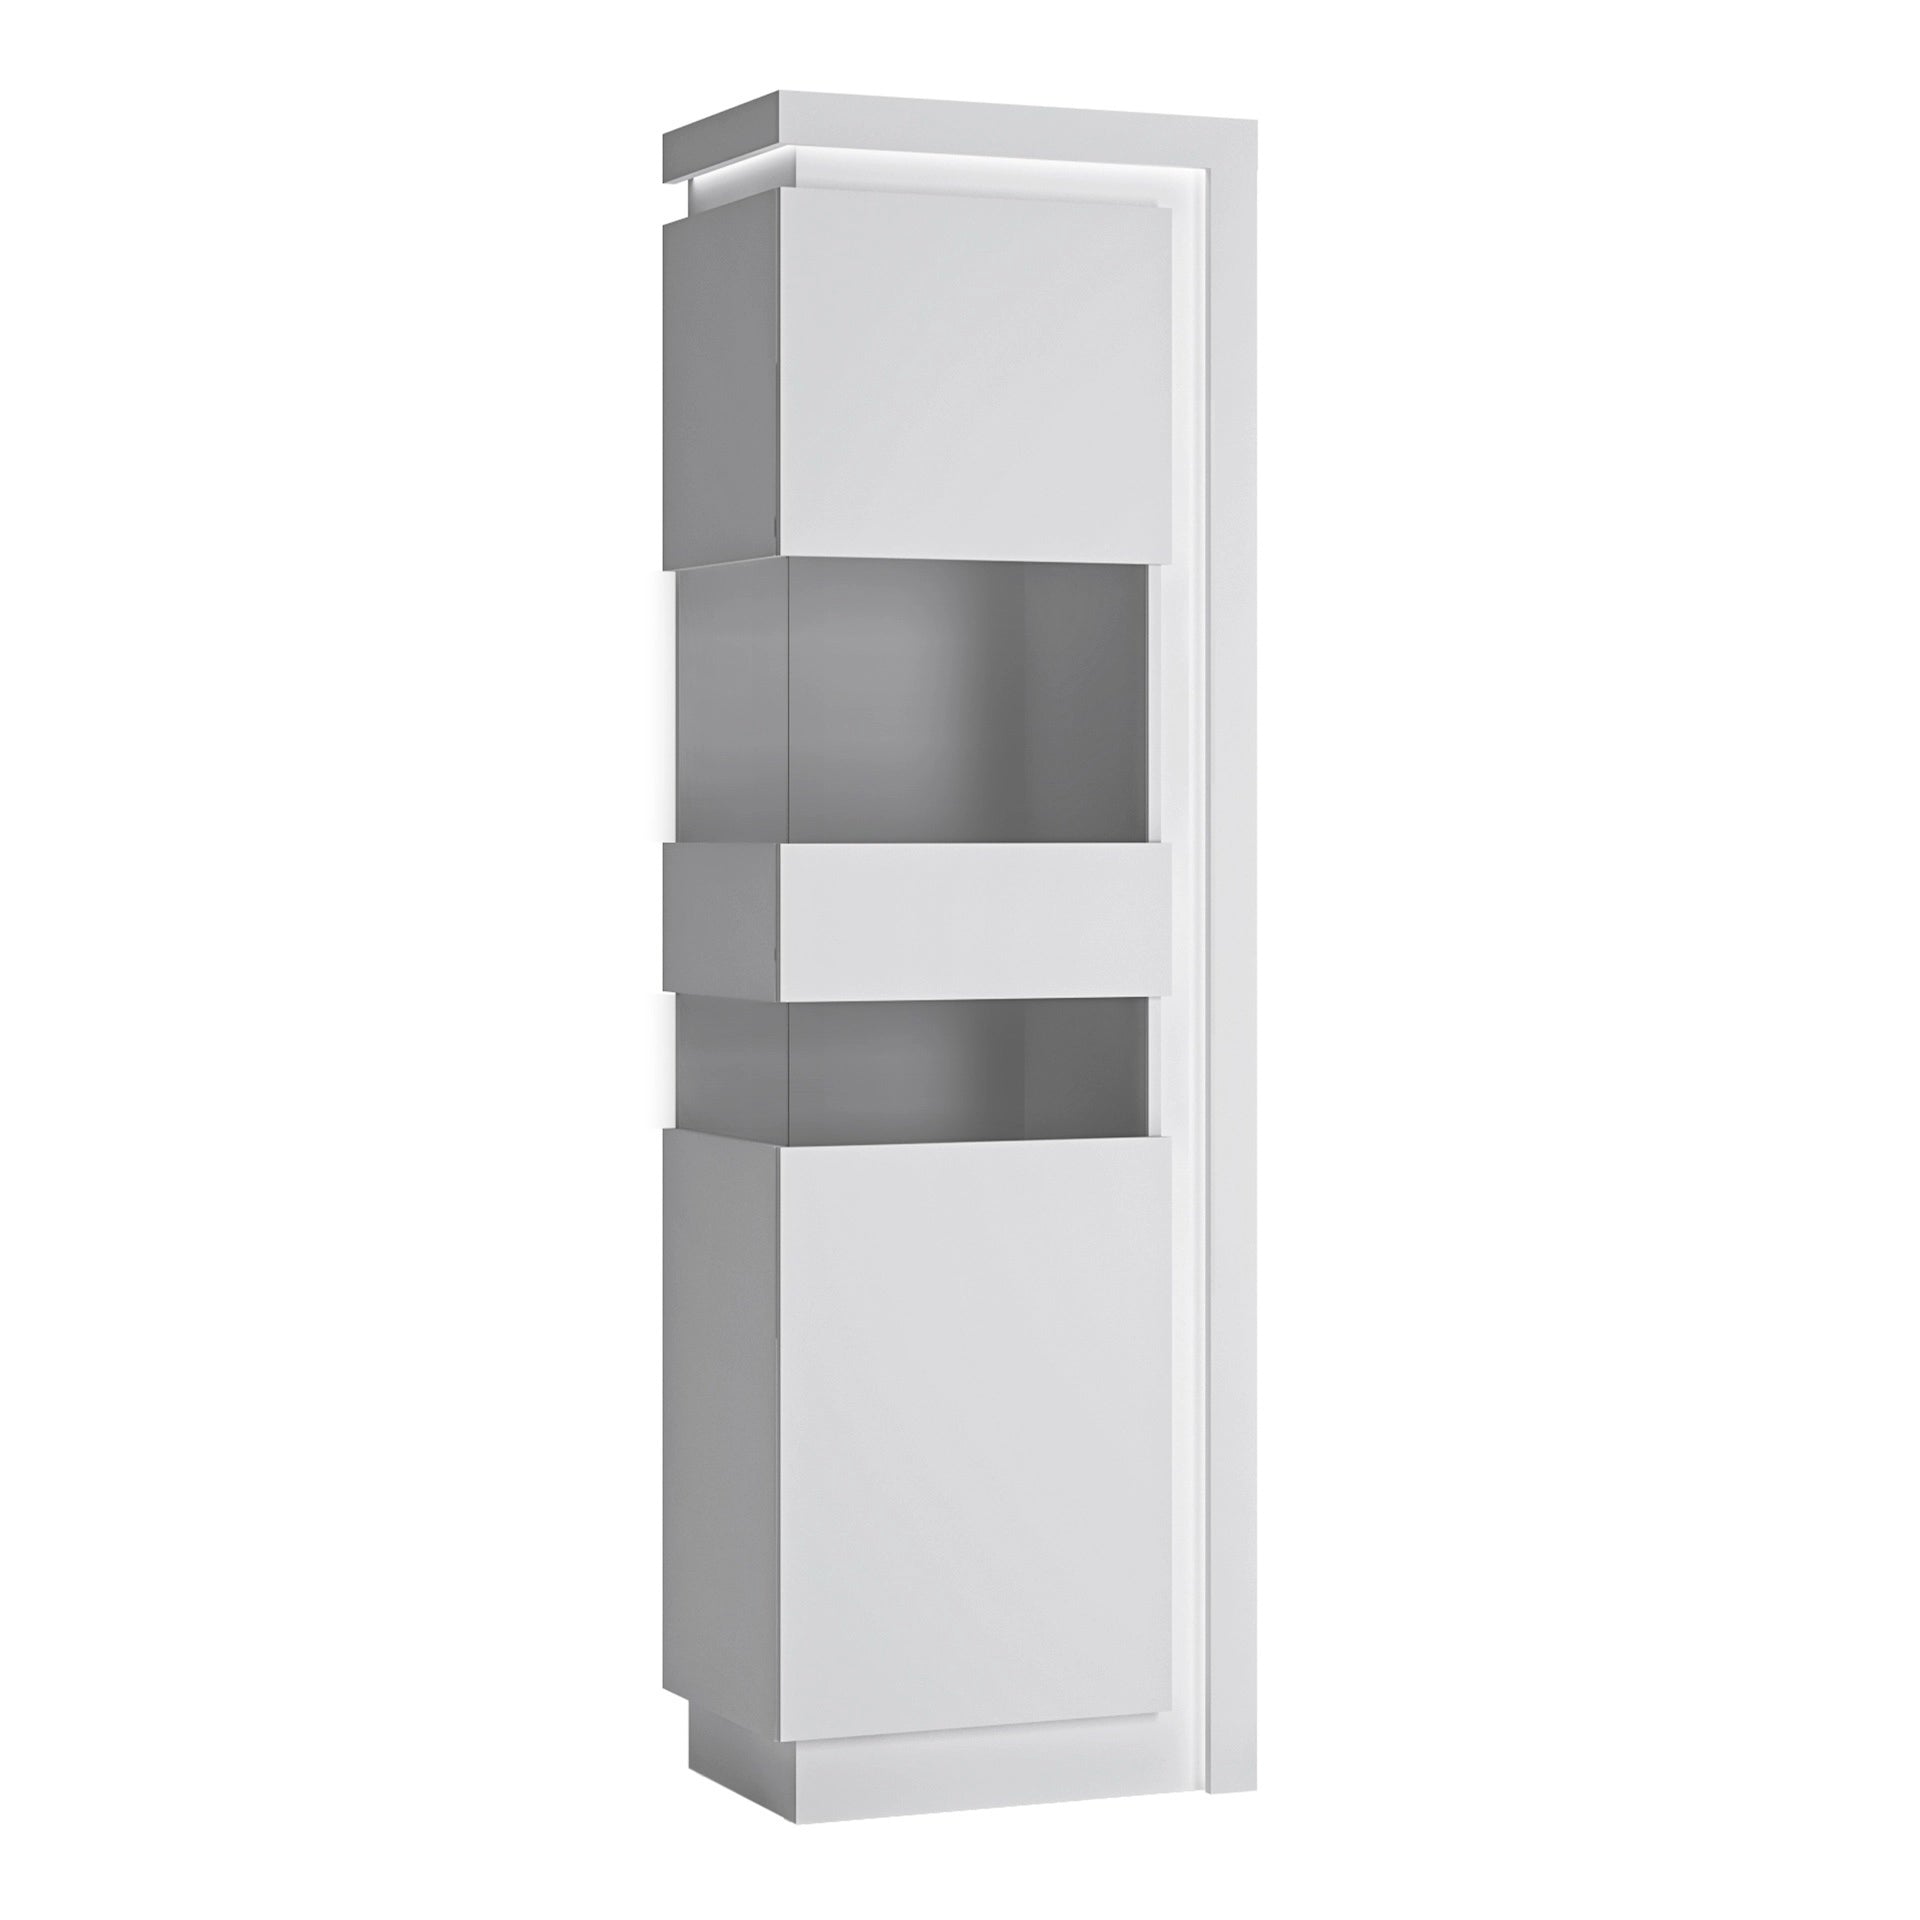 Furniture To Go Lyon Tall Narrow Display Cabinet (LHD) (Including Led Lighting) in White & High Gloss